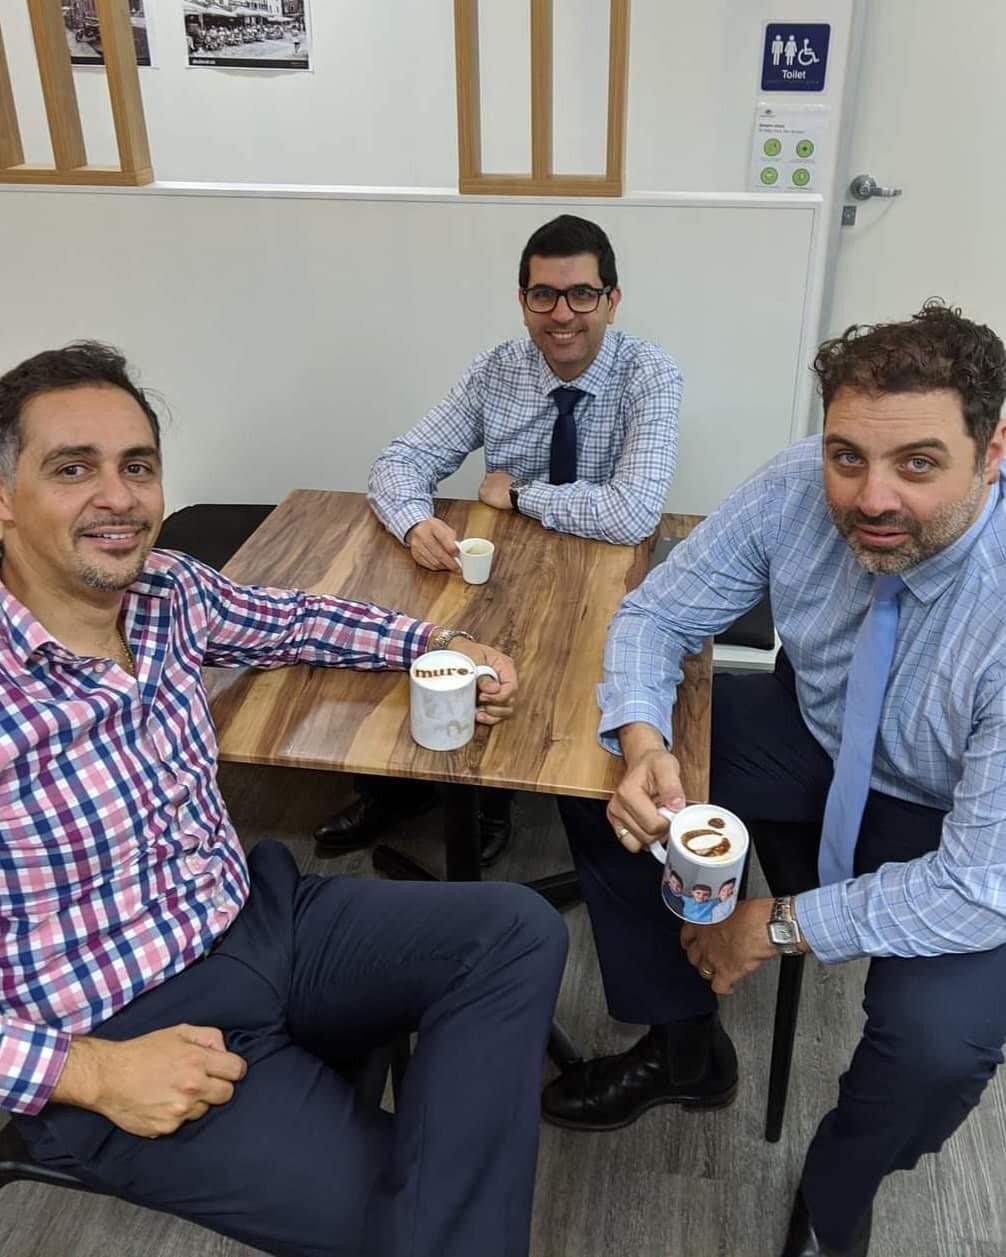 Coffee O'clock! Canio, Michele and Sebastian from @wealthdepot enjoy a personalised coffee made with Muro love and fresh @cafetalroasters beans!

#muro #brisbanecpa #muroaccountants #smallbusinessbrisbane